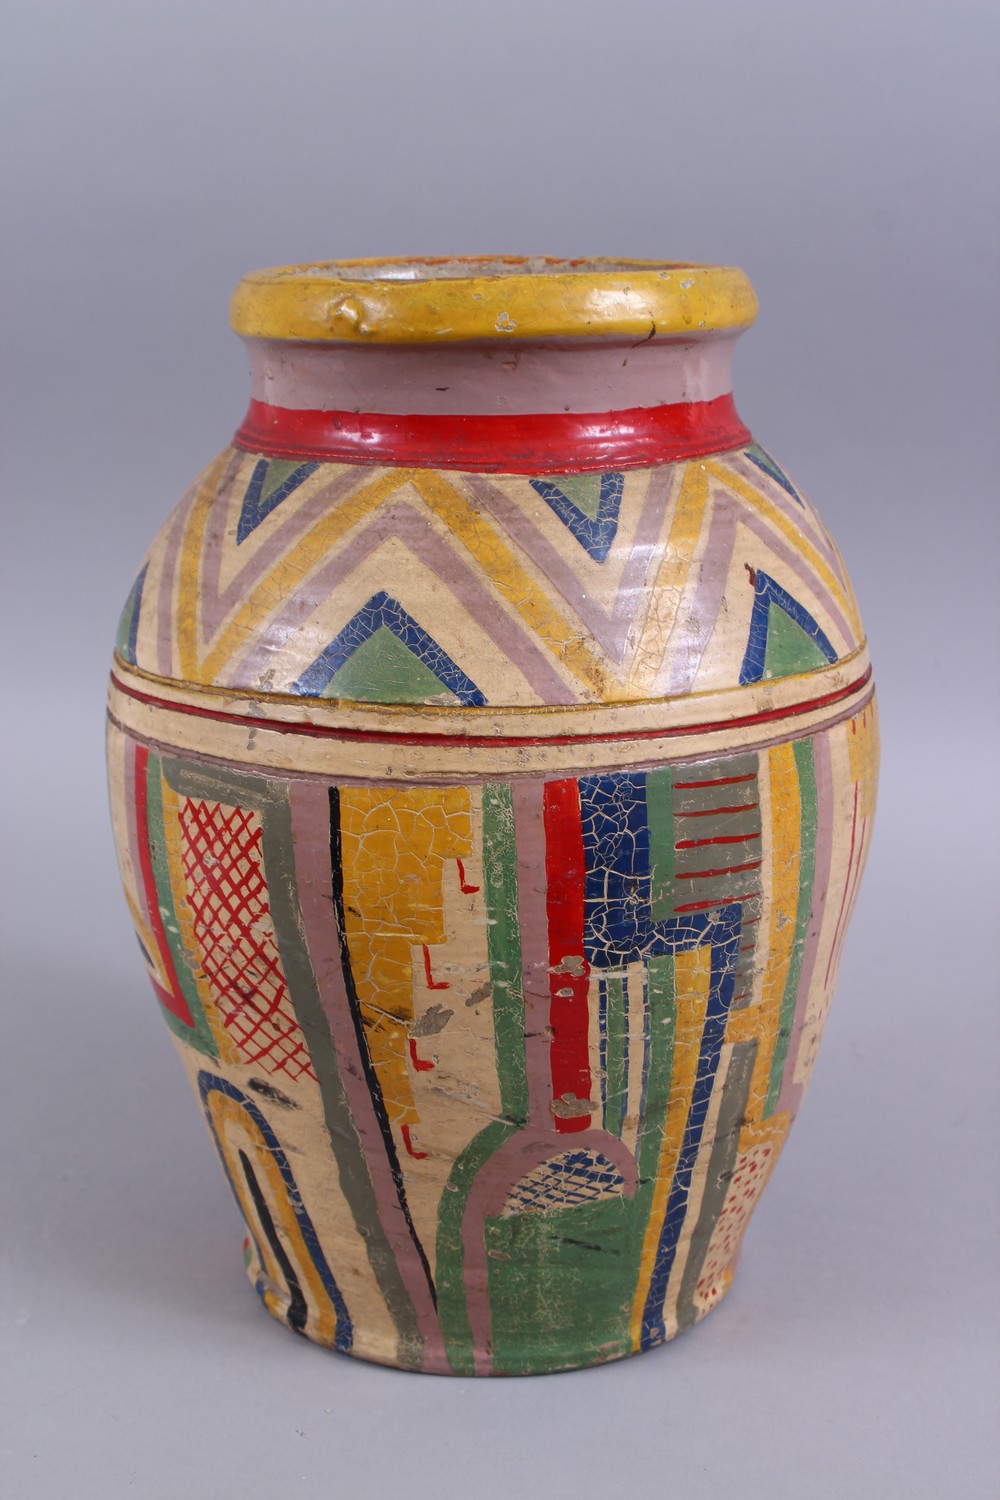 ATTRIBUTED TO THE OMEGA STUDIOS, CIRCA. 1930'S, GEOMETRIC PAINTED MONOCHROME VASE, similar designs - Image 2 of 4